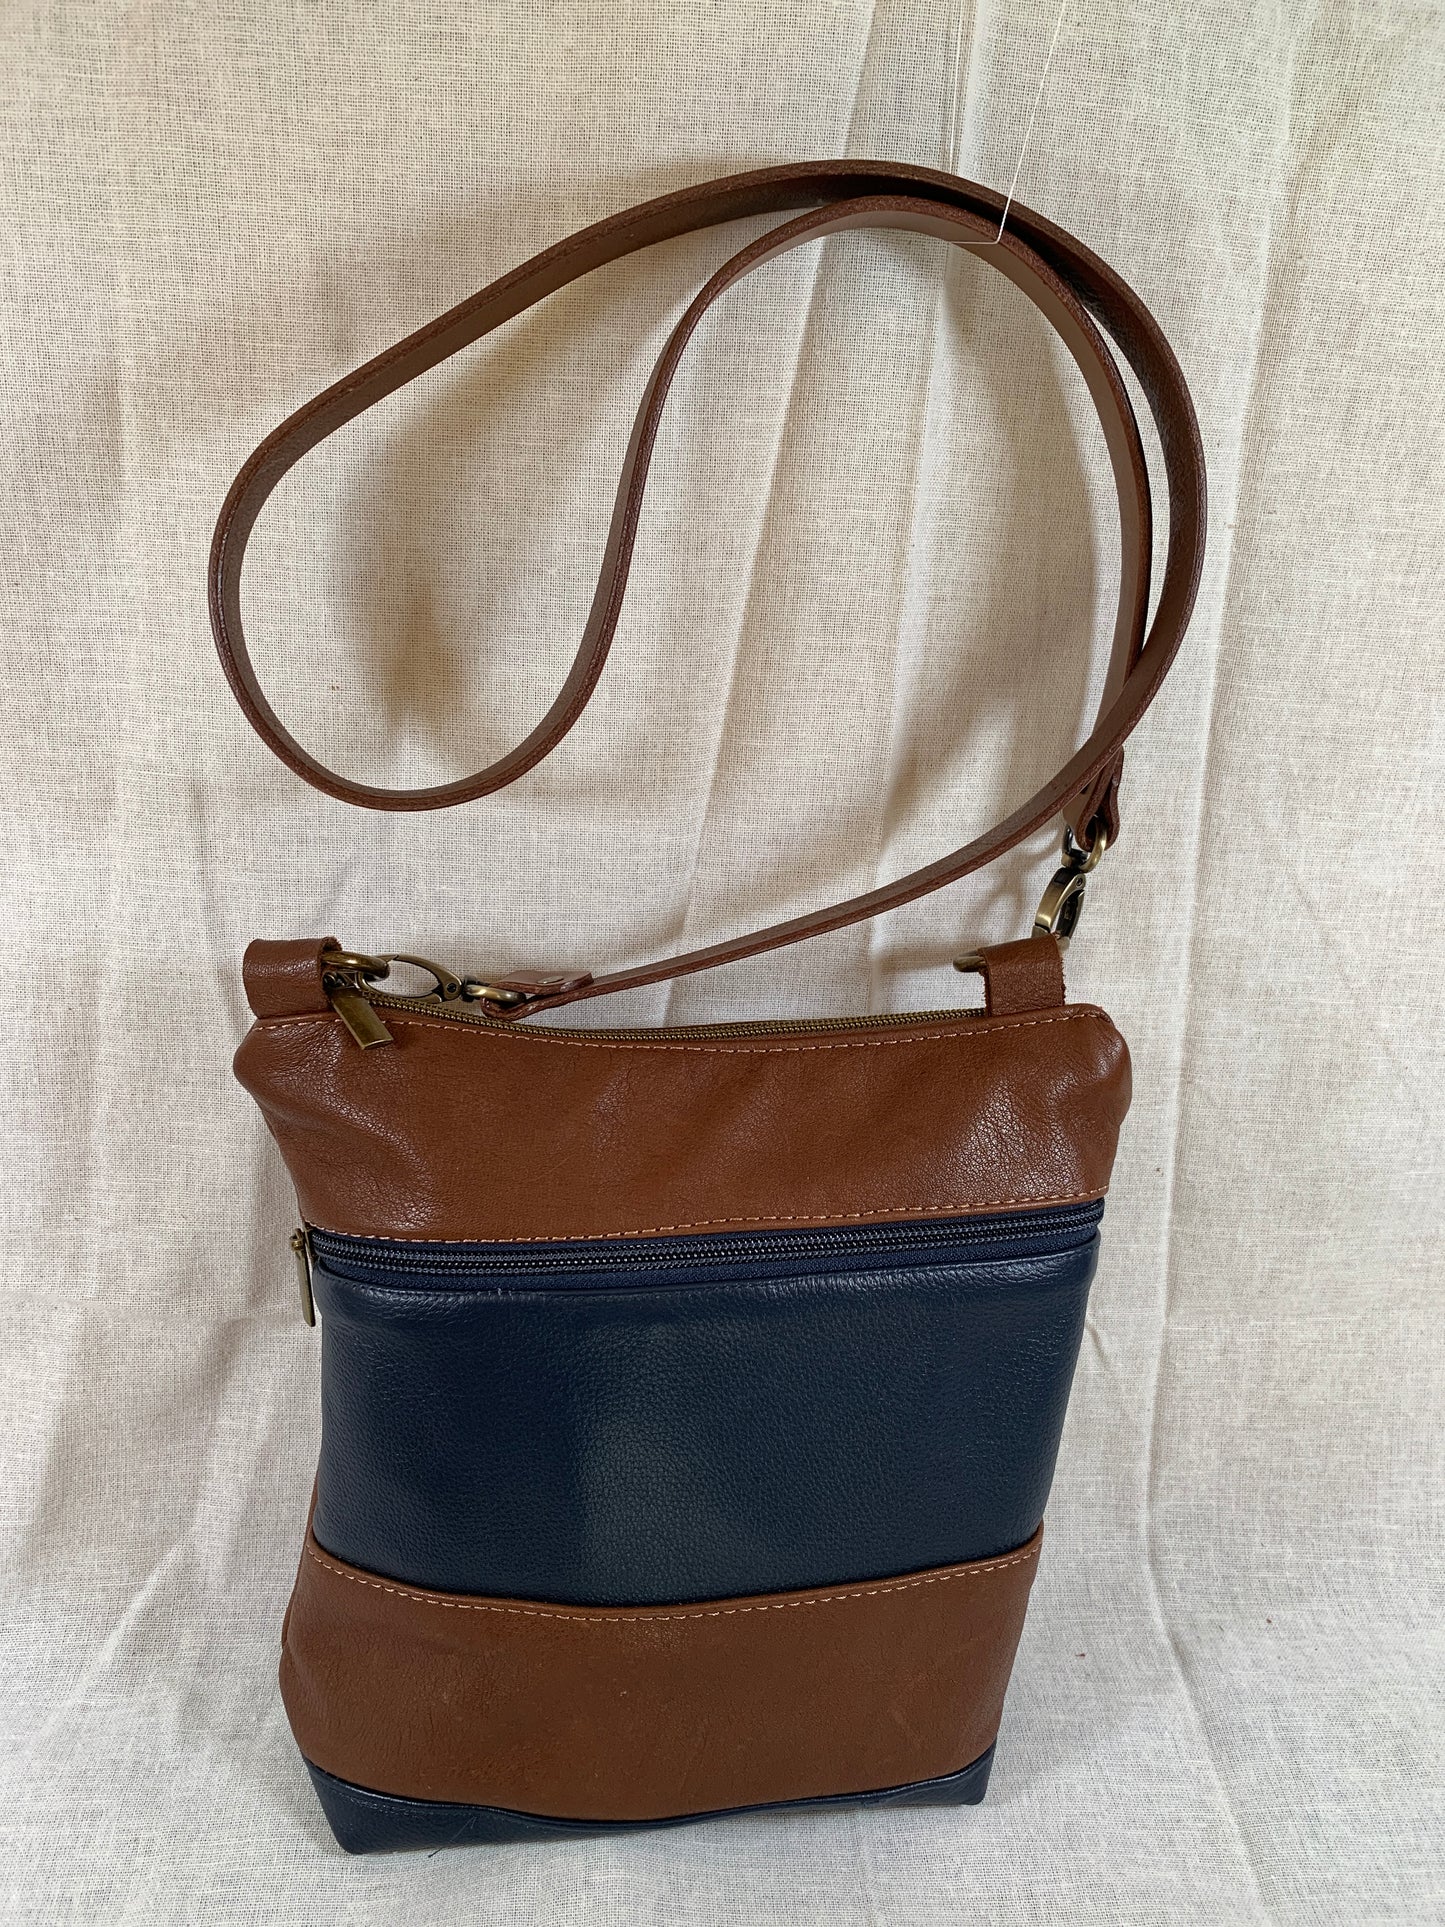 Cognac and navy blue classic striped all leather crossbody.